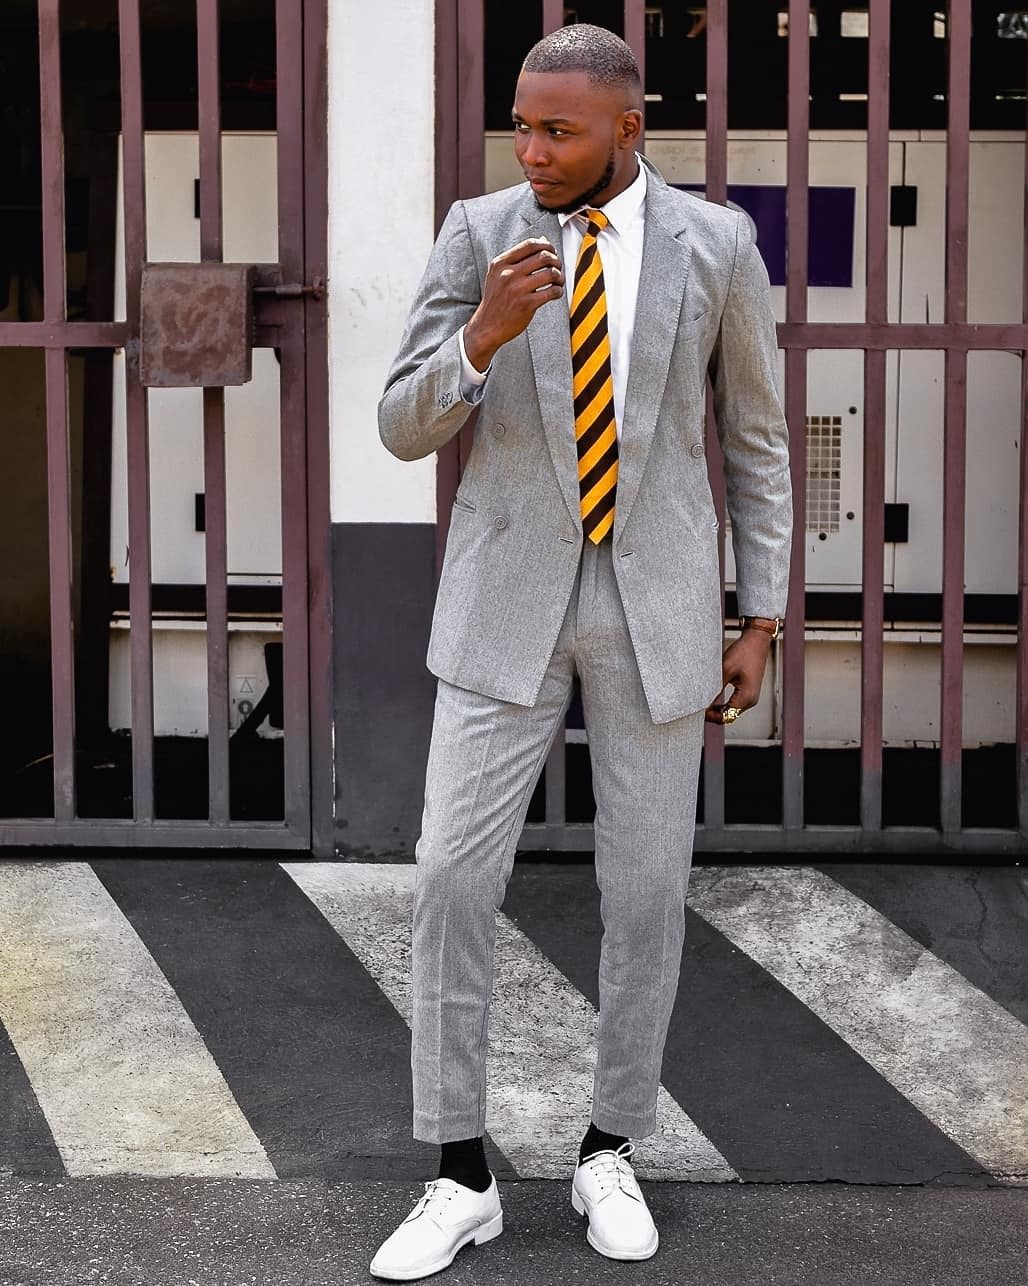 The Top 28 Color Ties To Match With A Grey Suit - Next Luxury